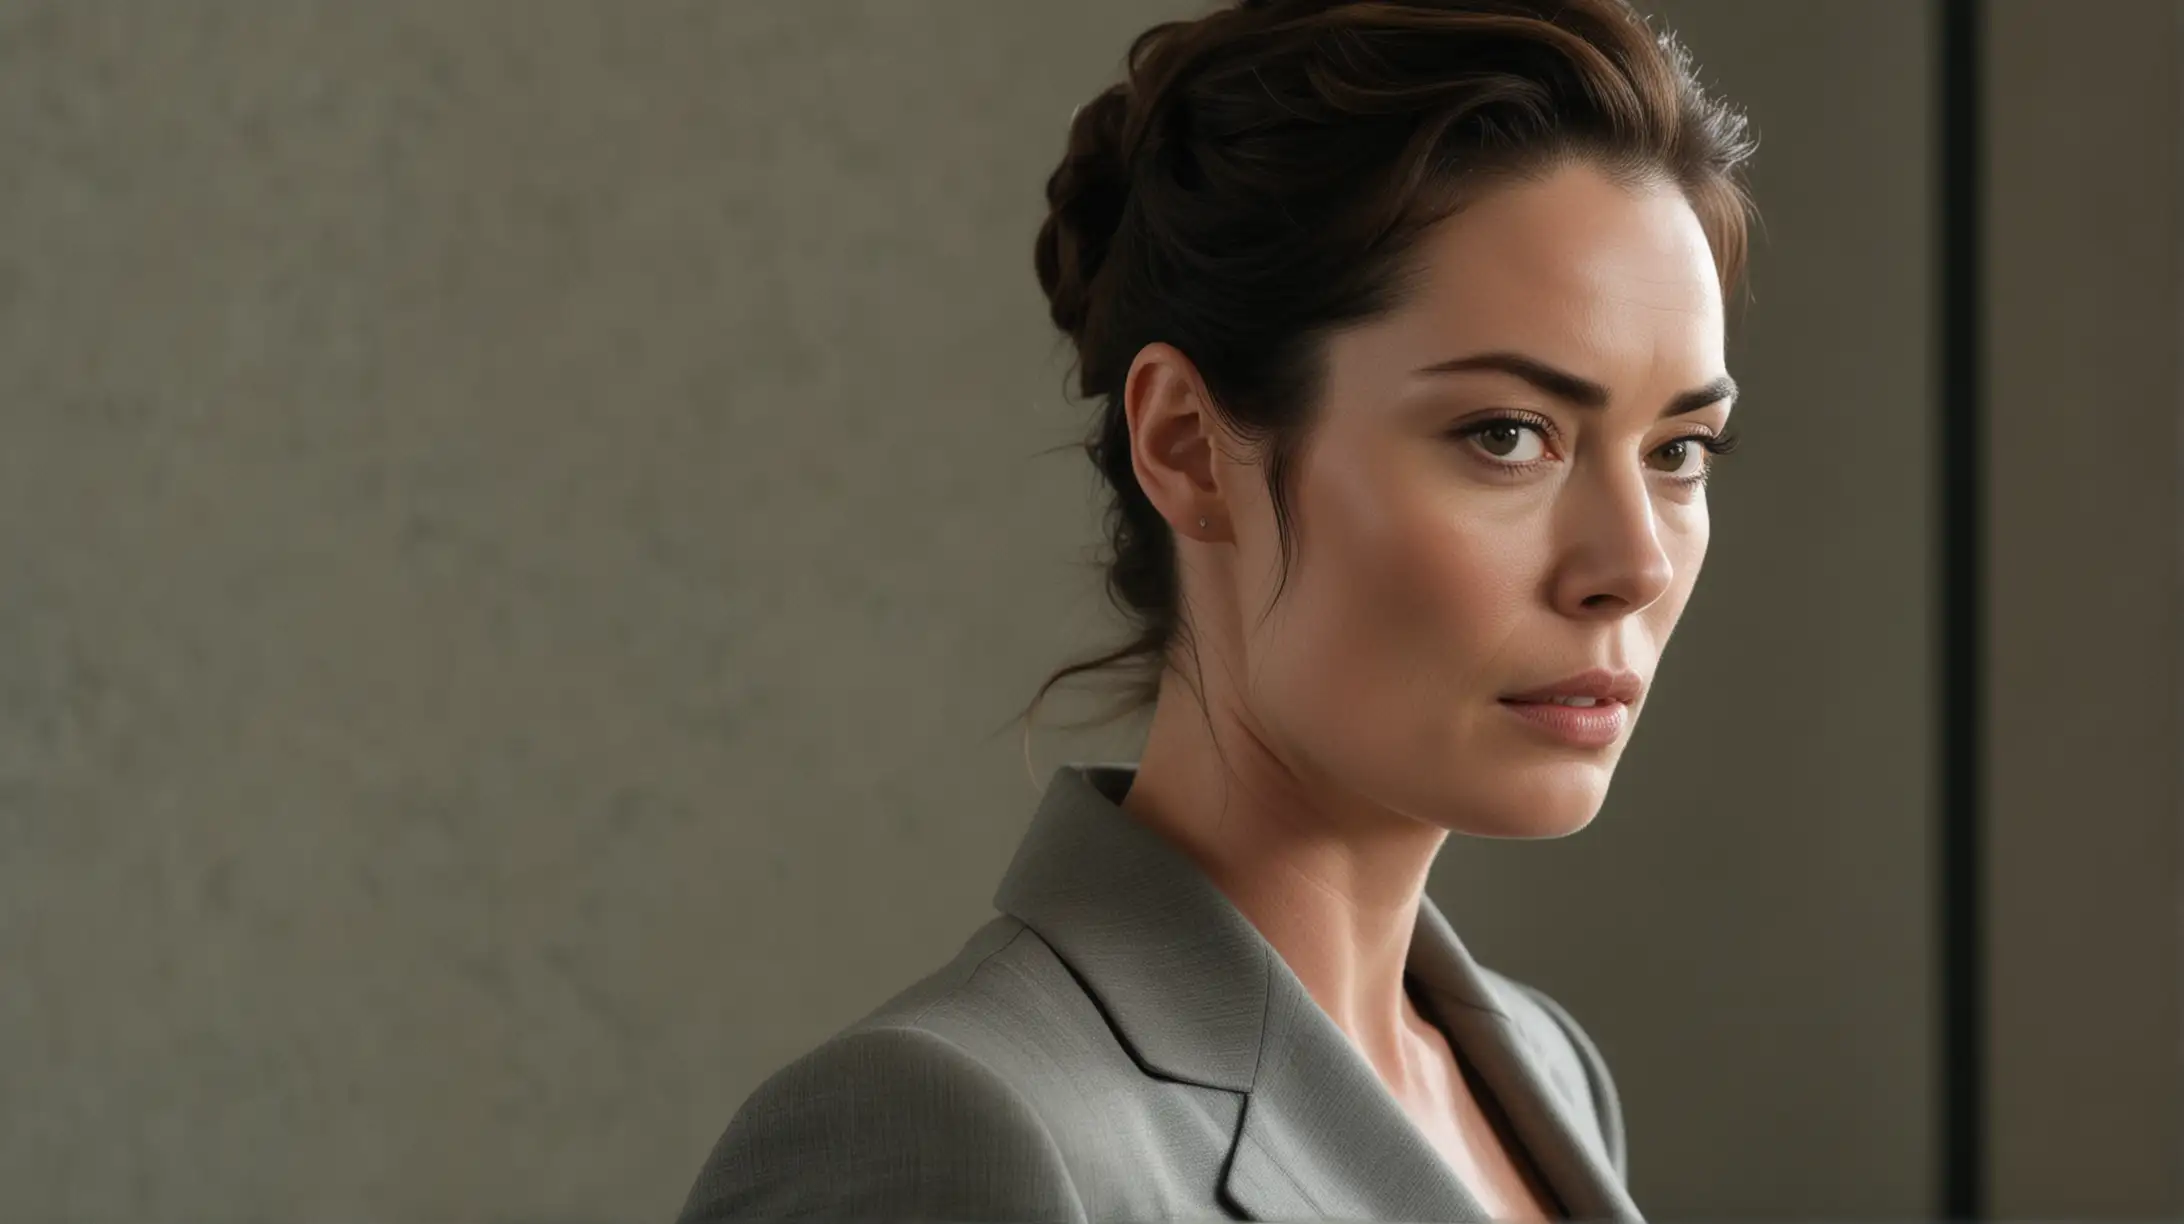 image of female character similar to a movie still taken from a movie scene, look similar to Lena Headey a determined, resilient women with a complex past. She is in her  early forties with sharp features, cold businesswoman 
